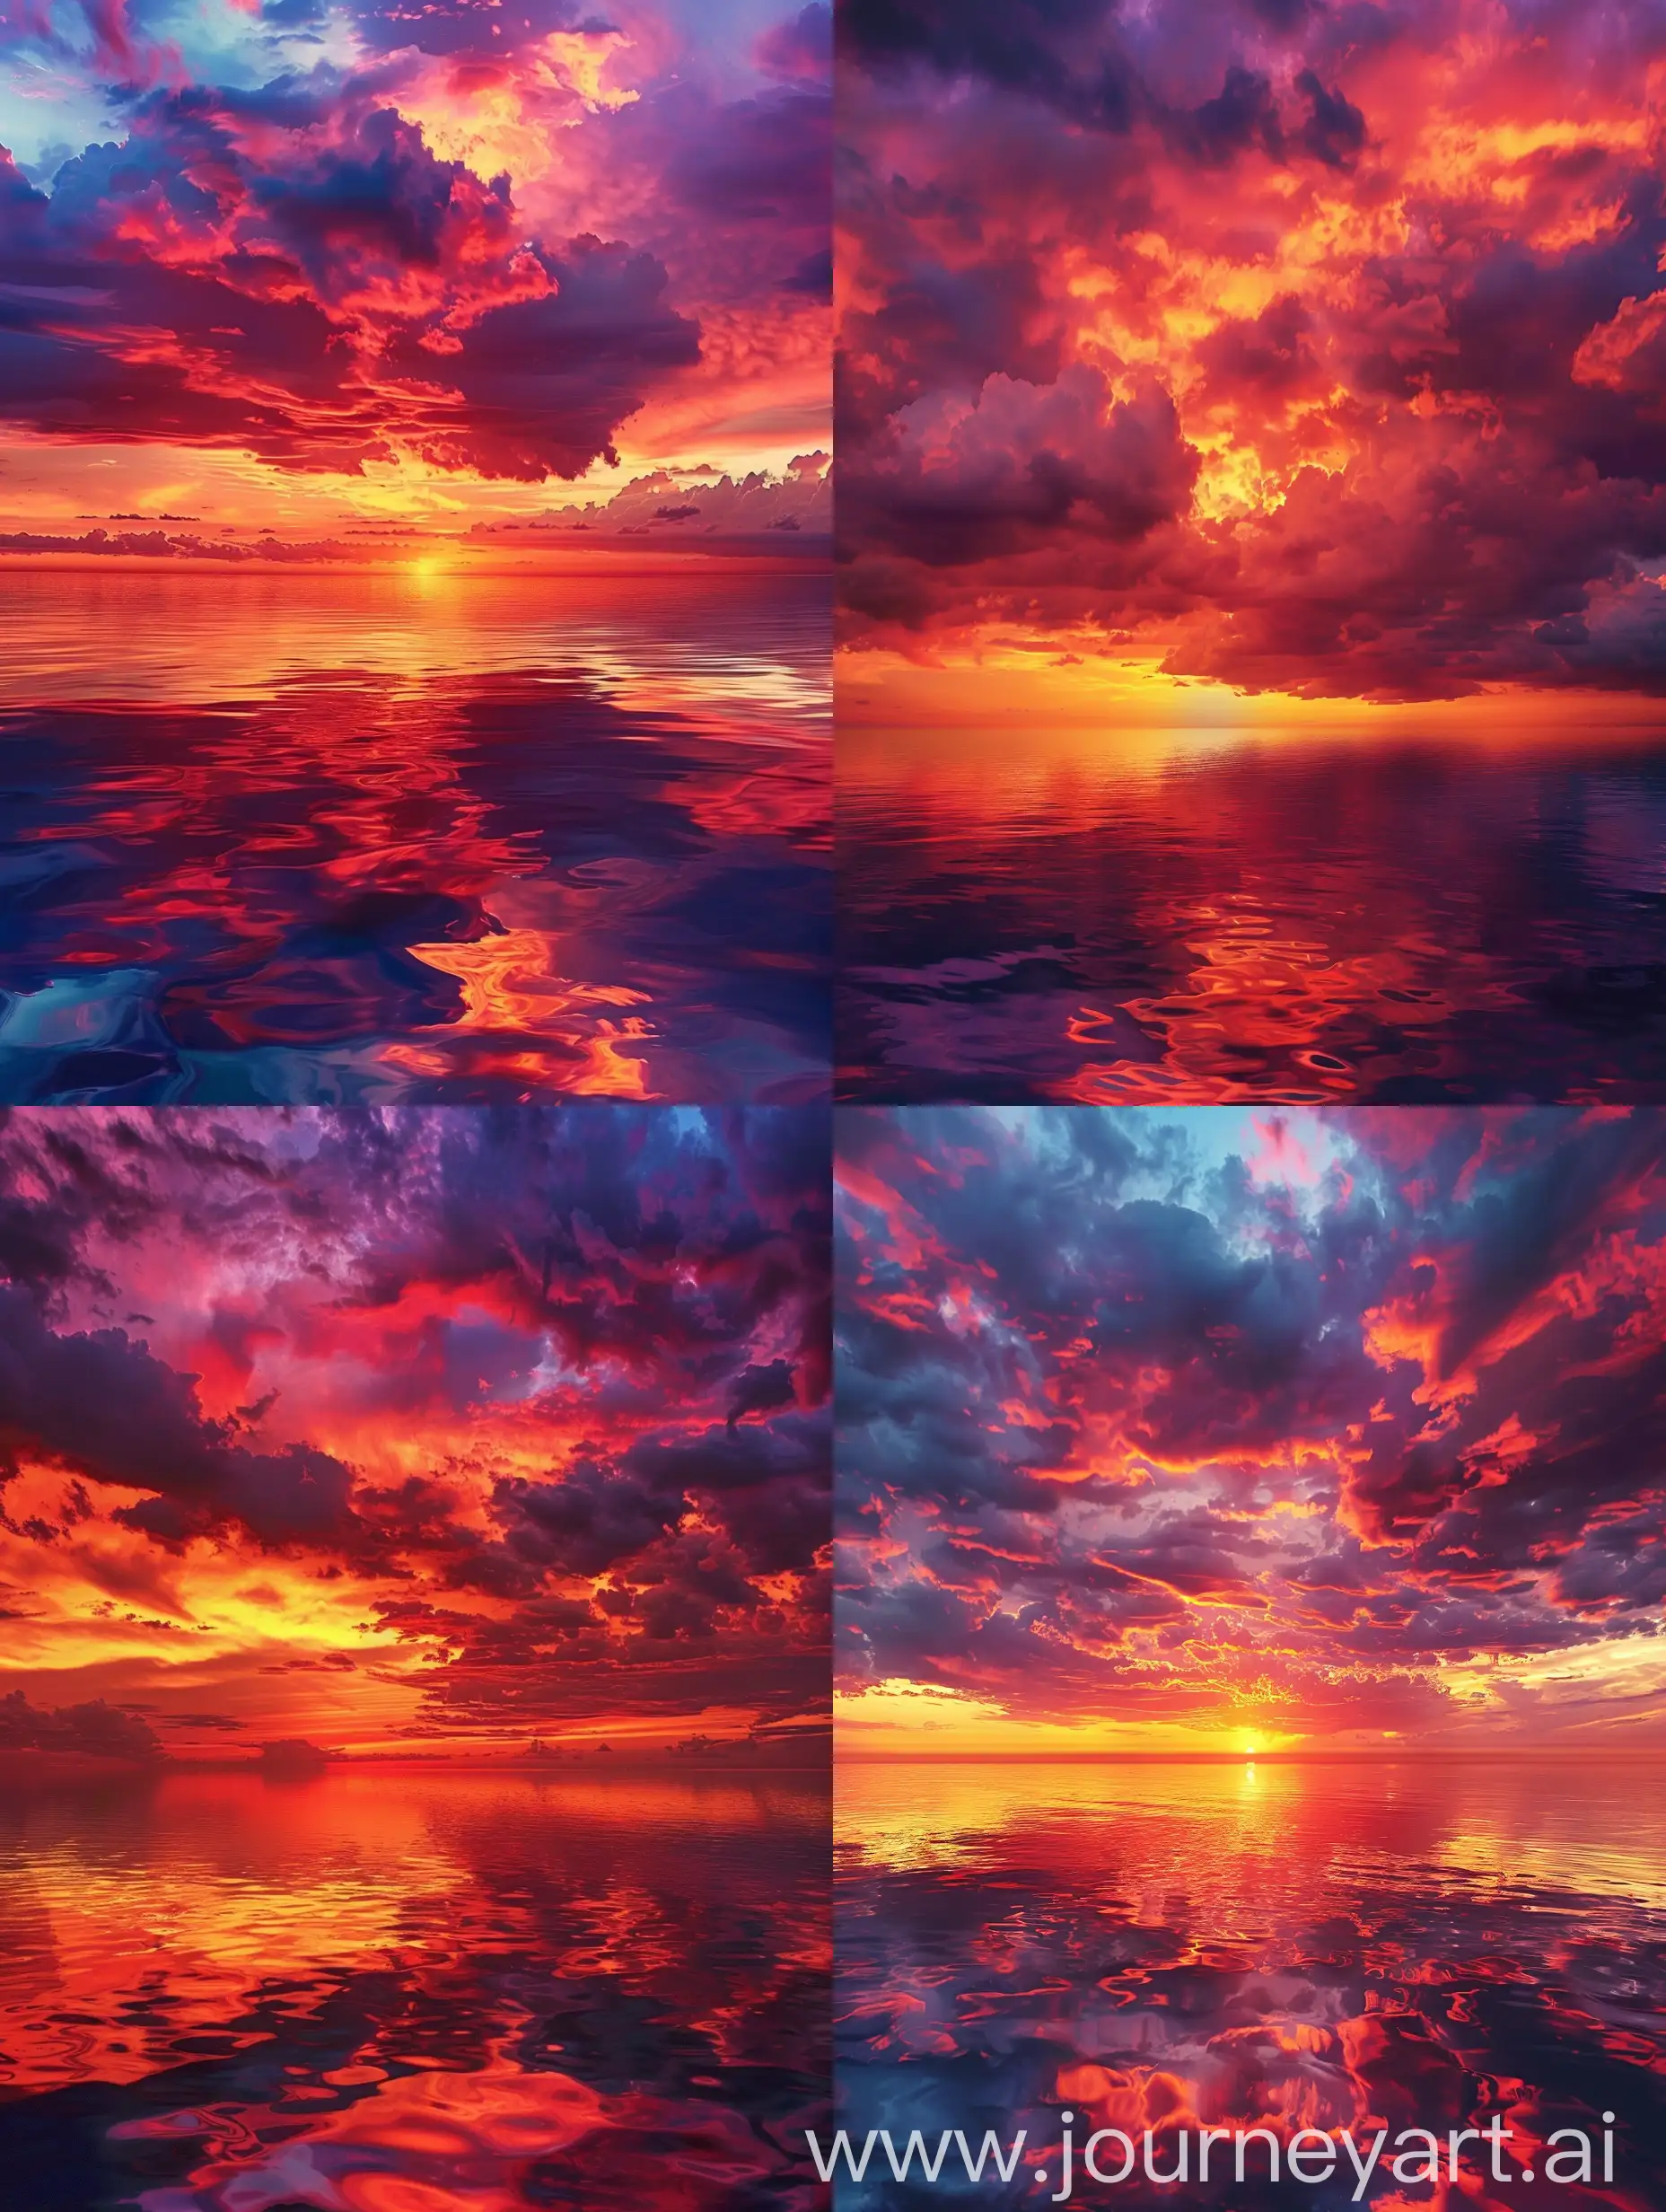  {"":"A vibrant sunset sky filled with shades of deep red, orange, and purple, with the sky appearing almost fiery, reflecting on a serene sea that mirrors the intense colors above. The clouds are thick and dramatic, adding a dynamic texture to the sky. This moment of twilight casts a surreal glow over the waters, giving them a near-magenta hue. The transition from day to night is captured at its most dramatic, with the colors at their peak intensity and the clouds and sea appearing almost otherworldly in their beauty.","size":"1024x1024"}
